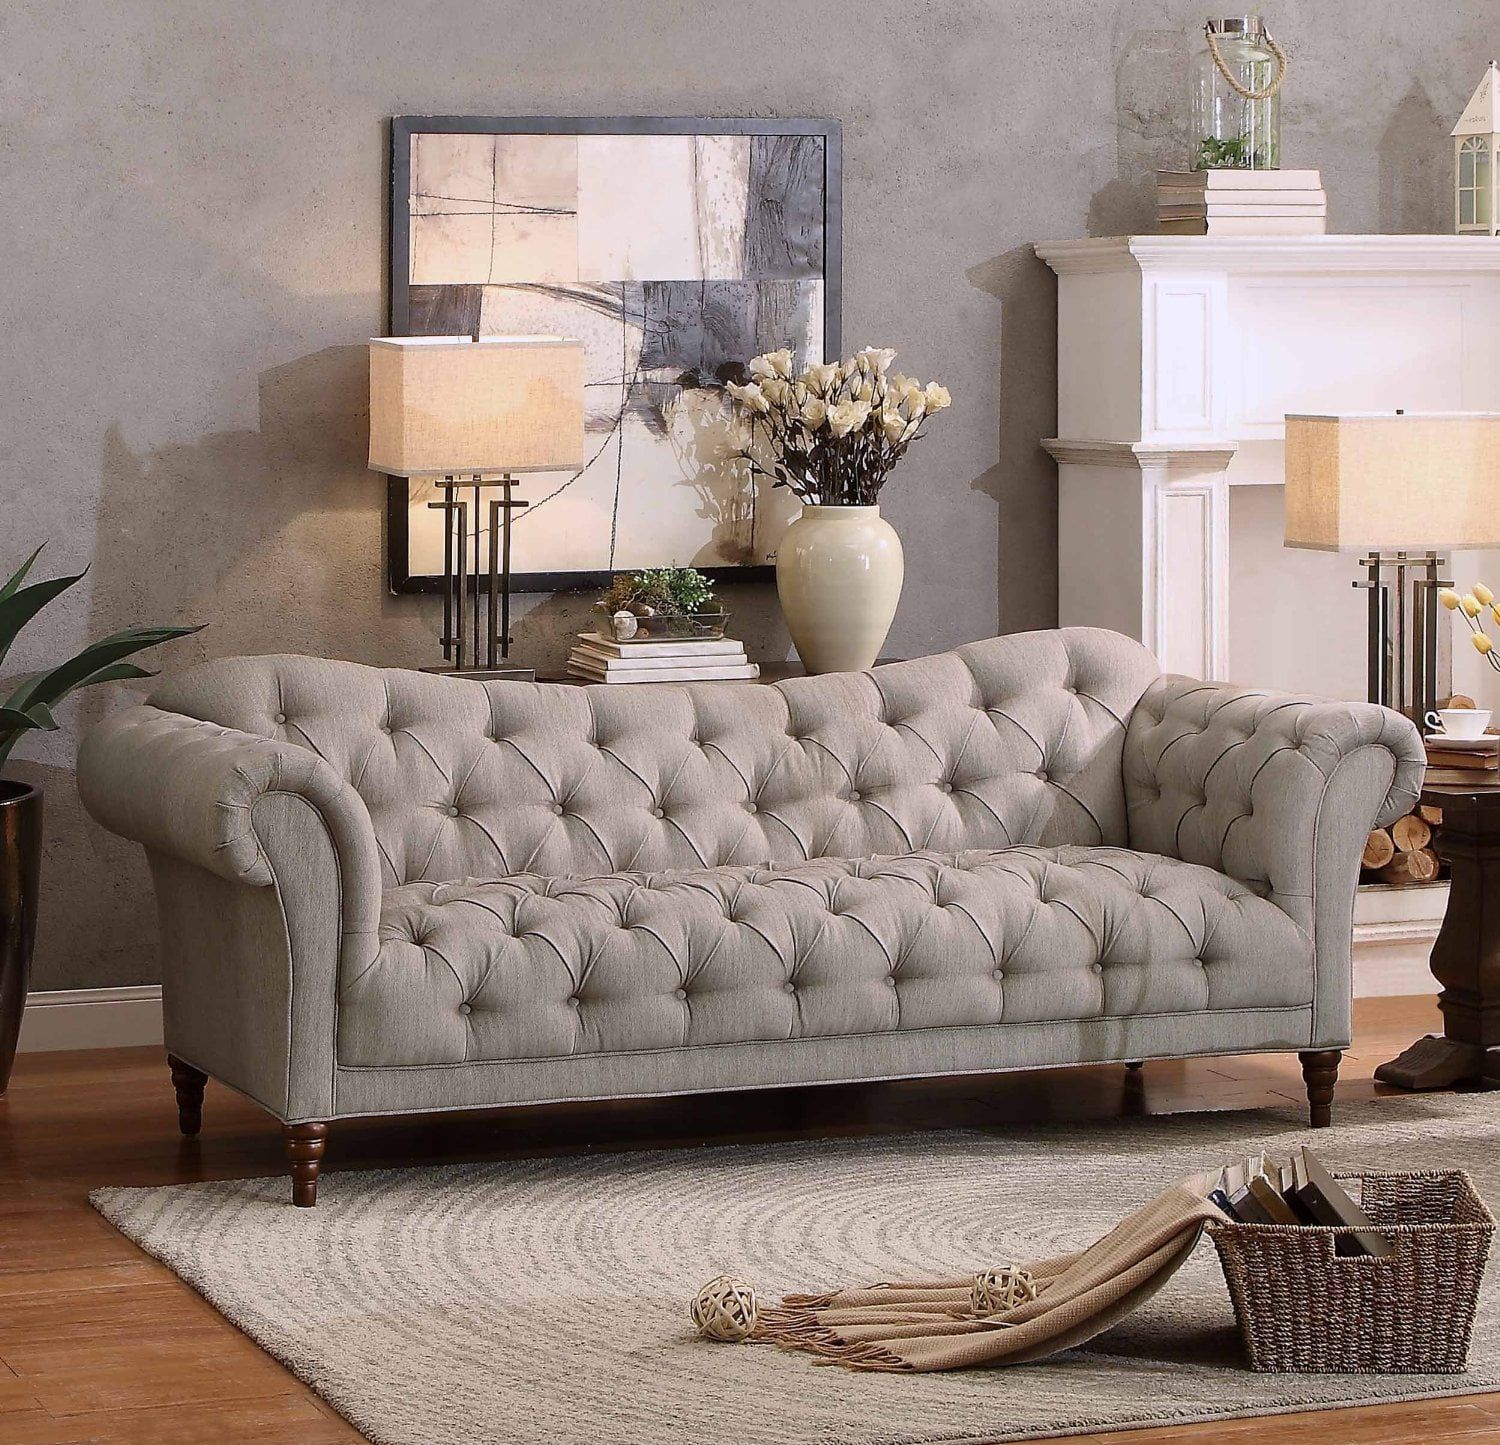 25 Best Chesterfield Sofas To Buy In 2016 With Regard To Chesterfield Sofas (View 2 of 21)